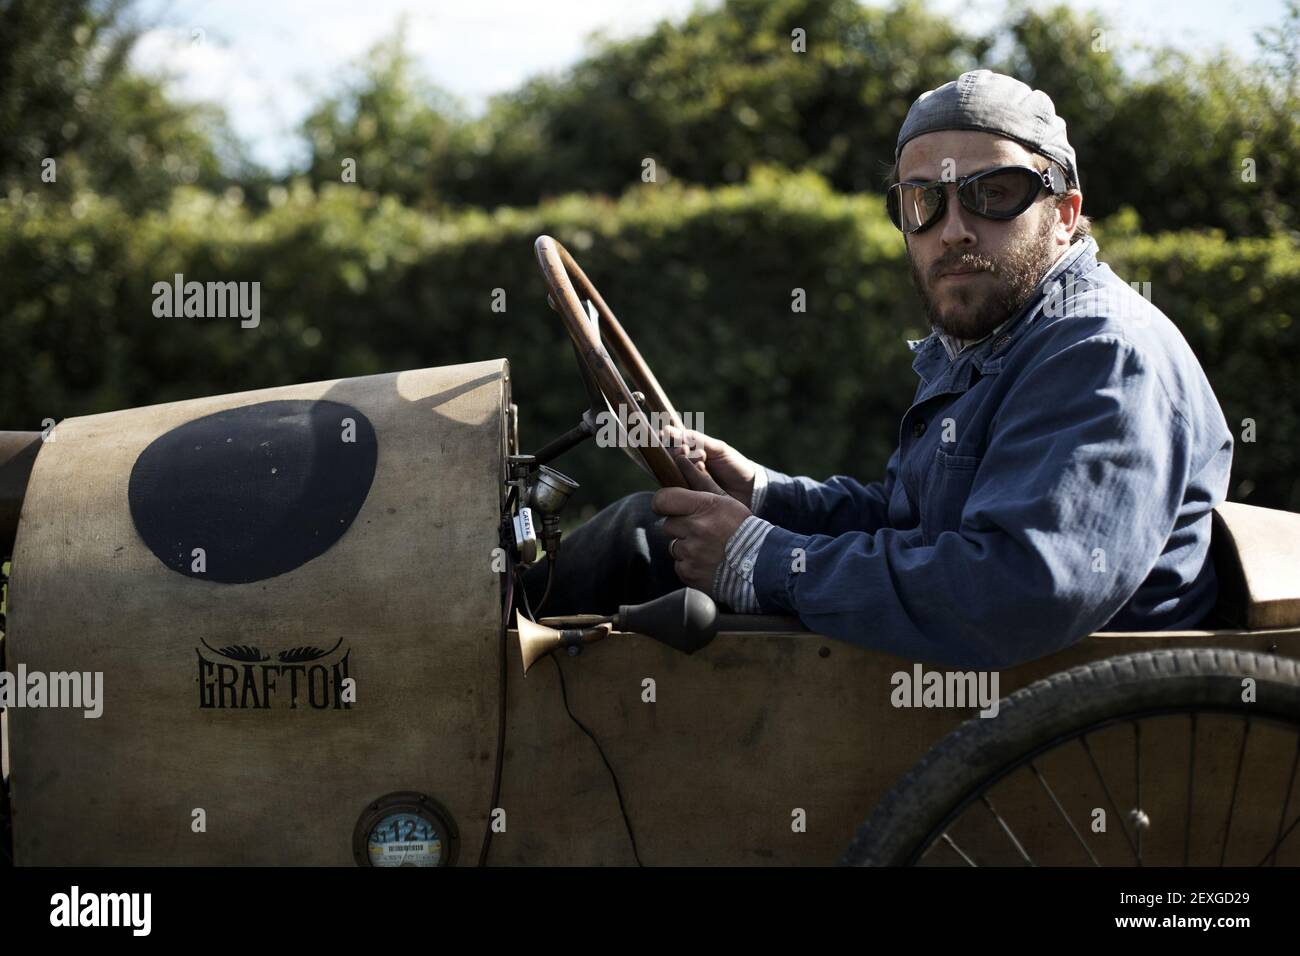 https://c8.alamy.com/comp/2EXGD29/road-trip-with-a-vintage-grafton-cycle-car-man-with-hat-and-goggles-vintage-look-driving-on-a-road-2EXGD29.jpg